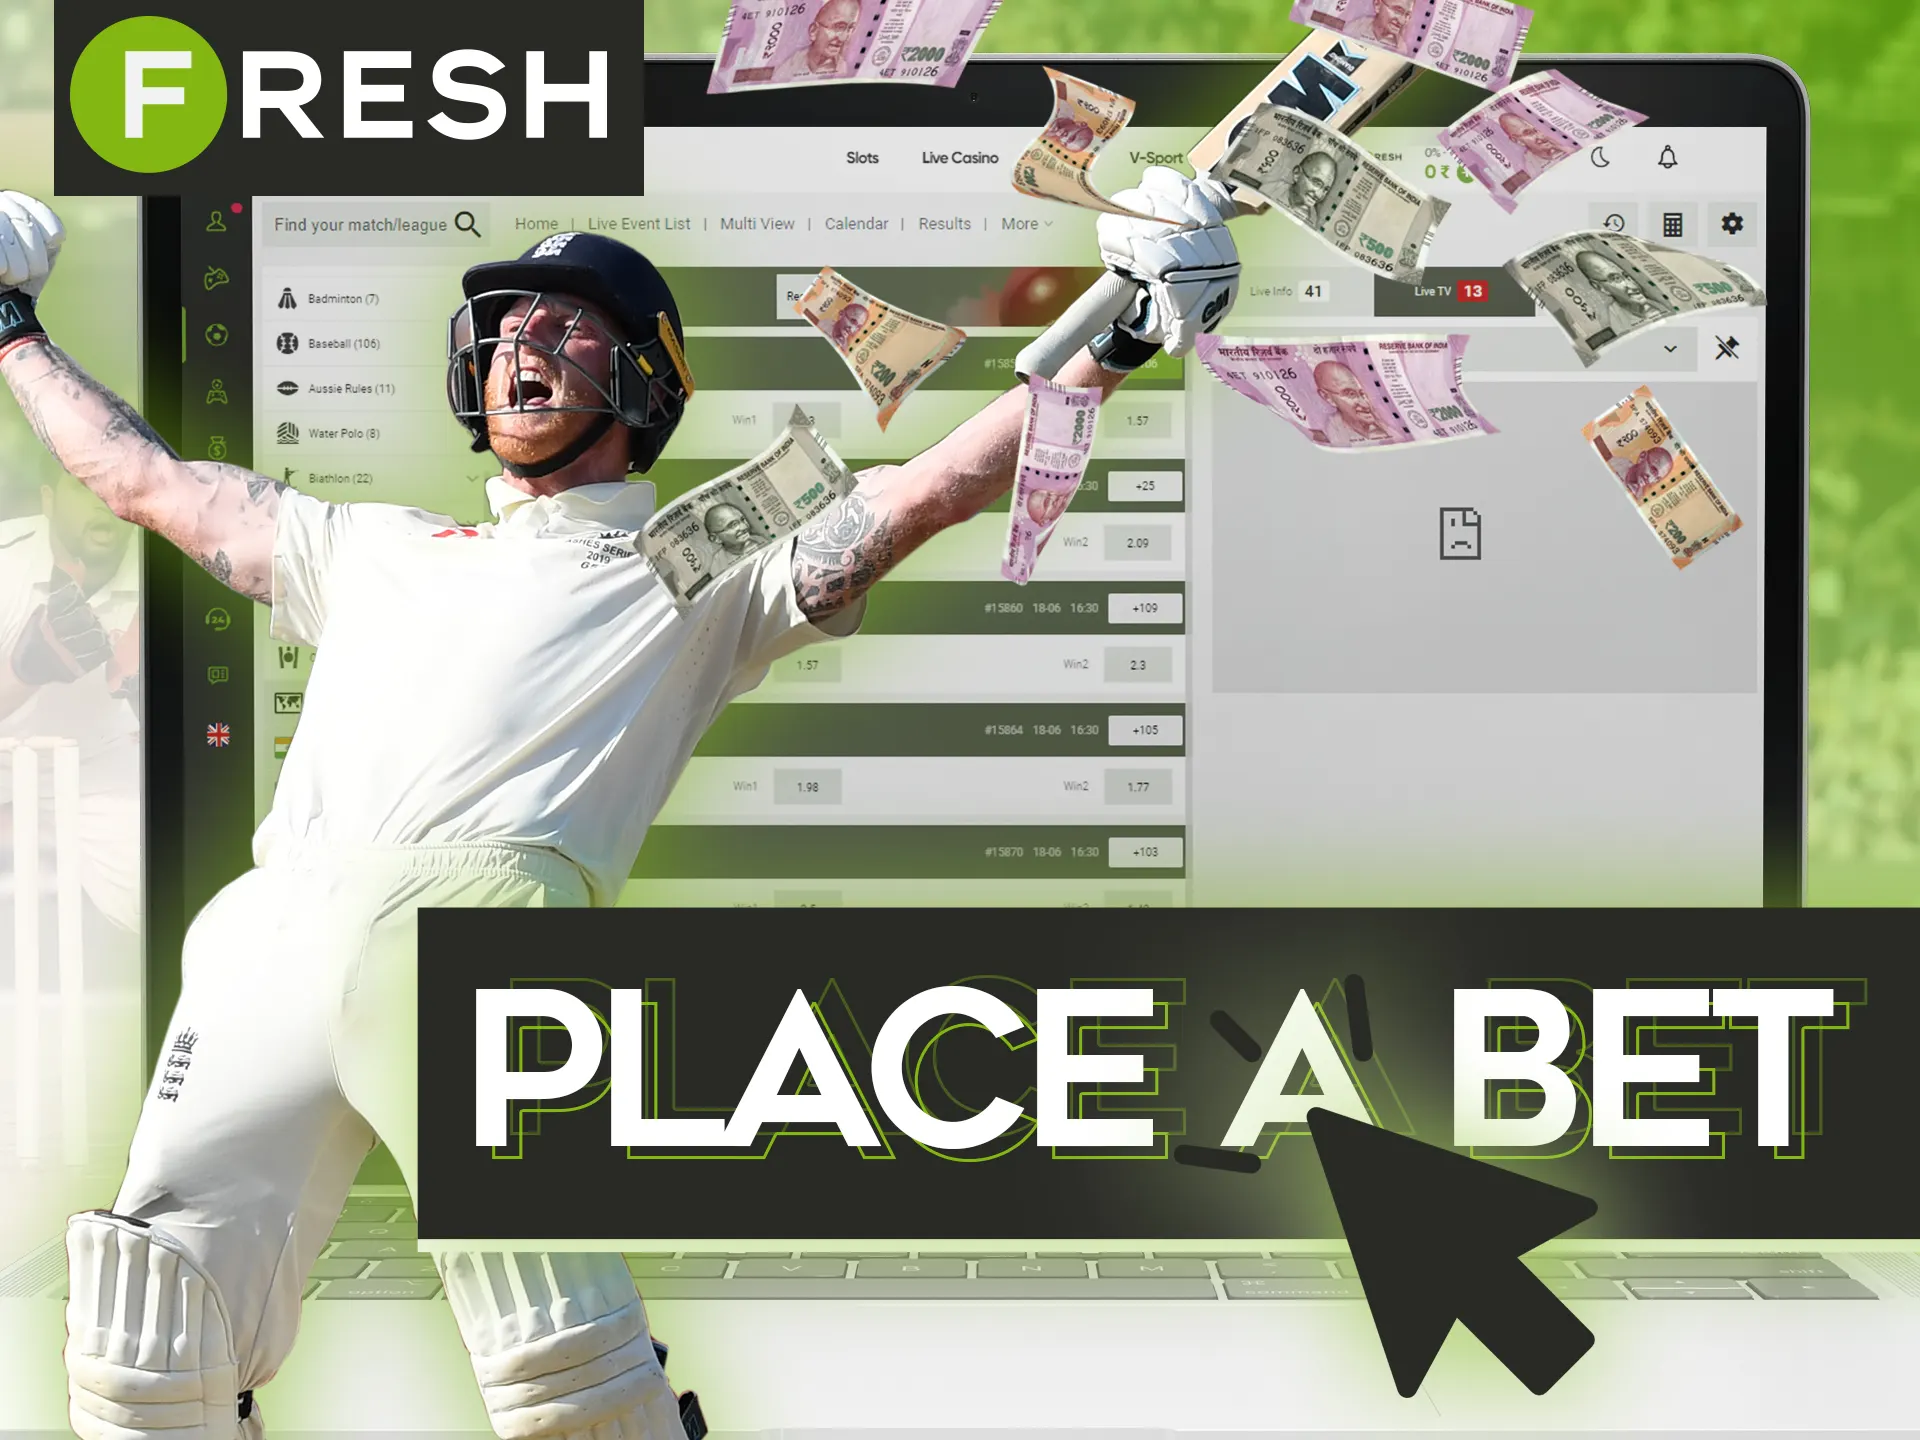 Make a new bet at the Fresh Casino by following simple steps.